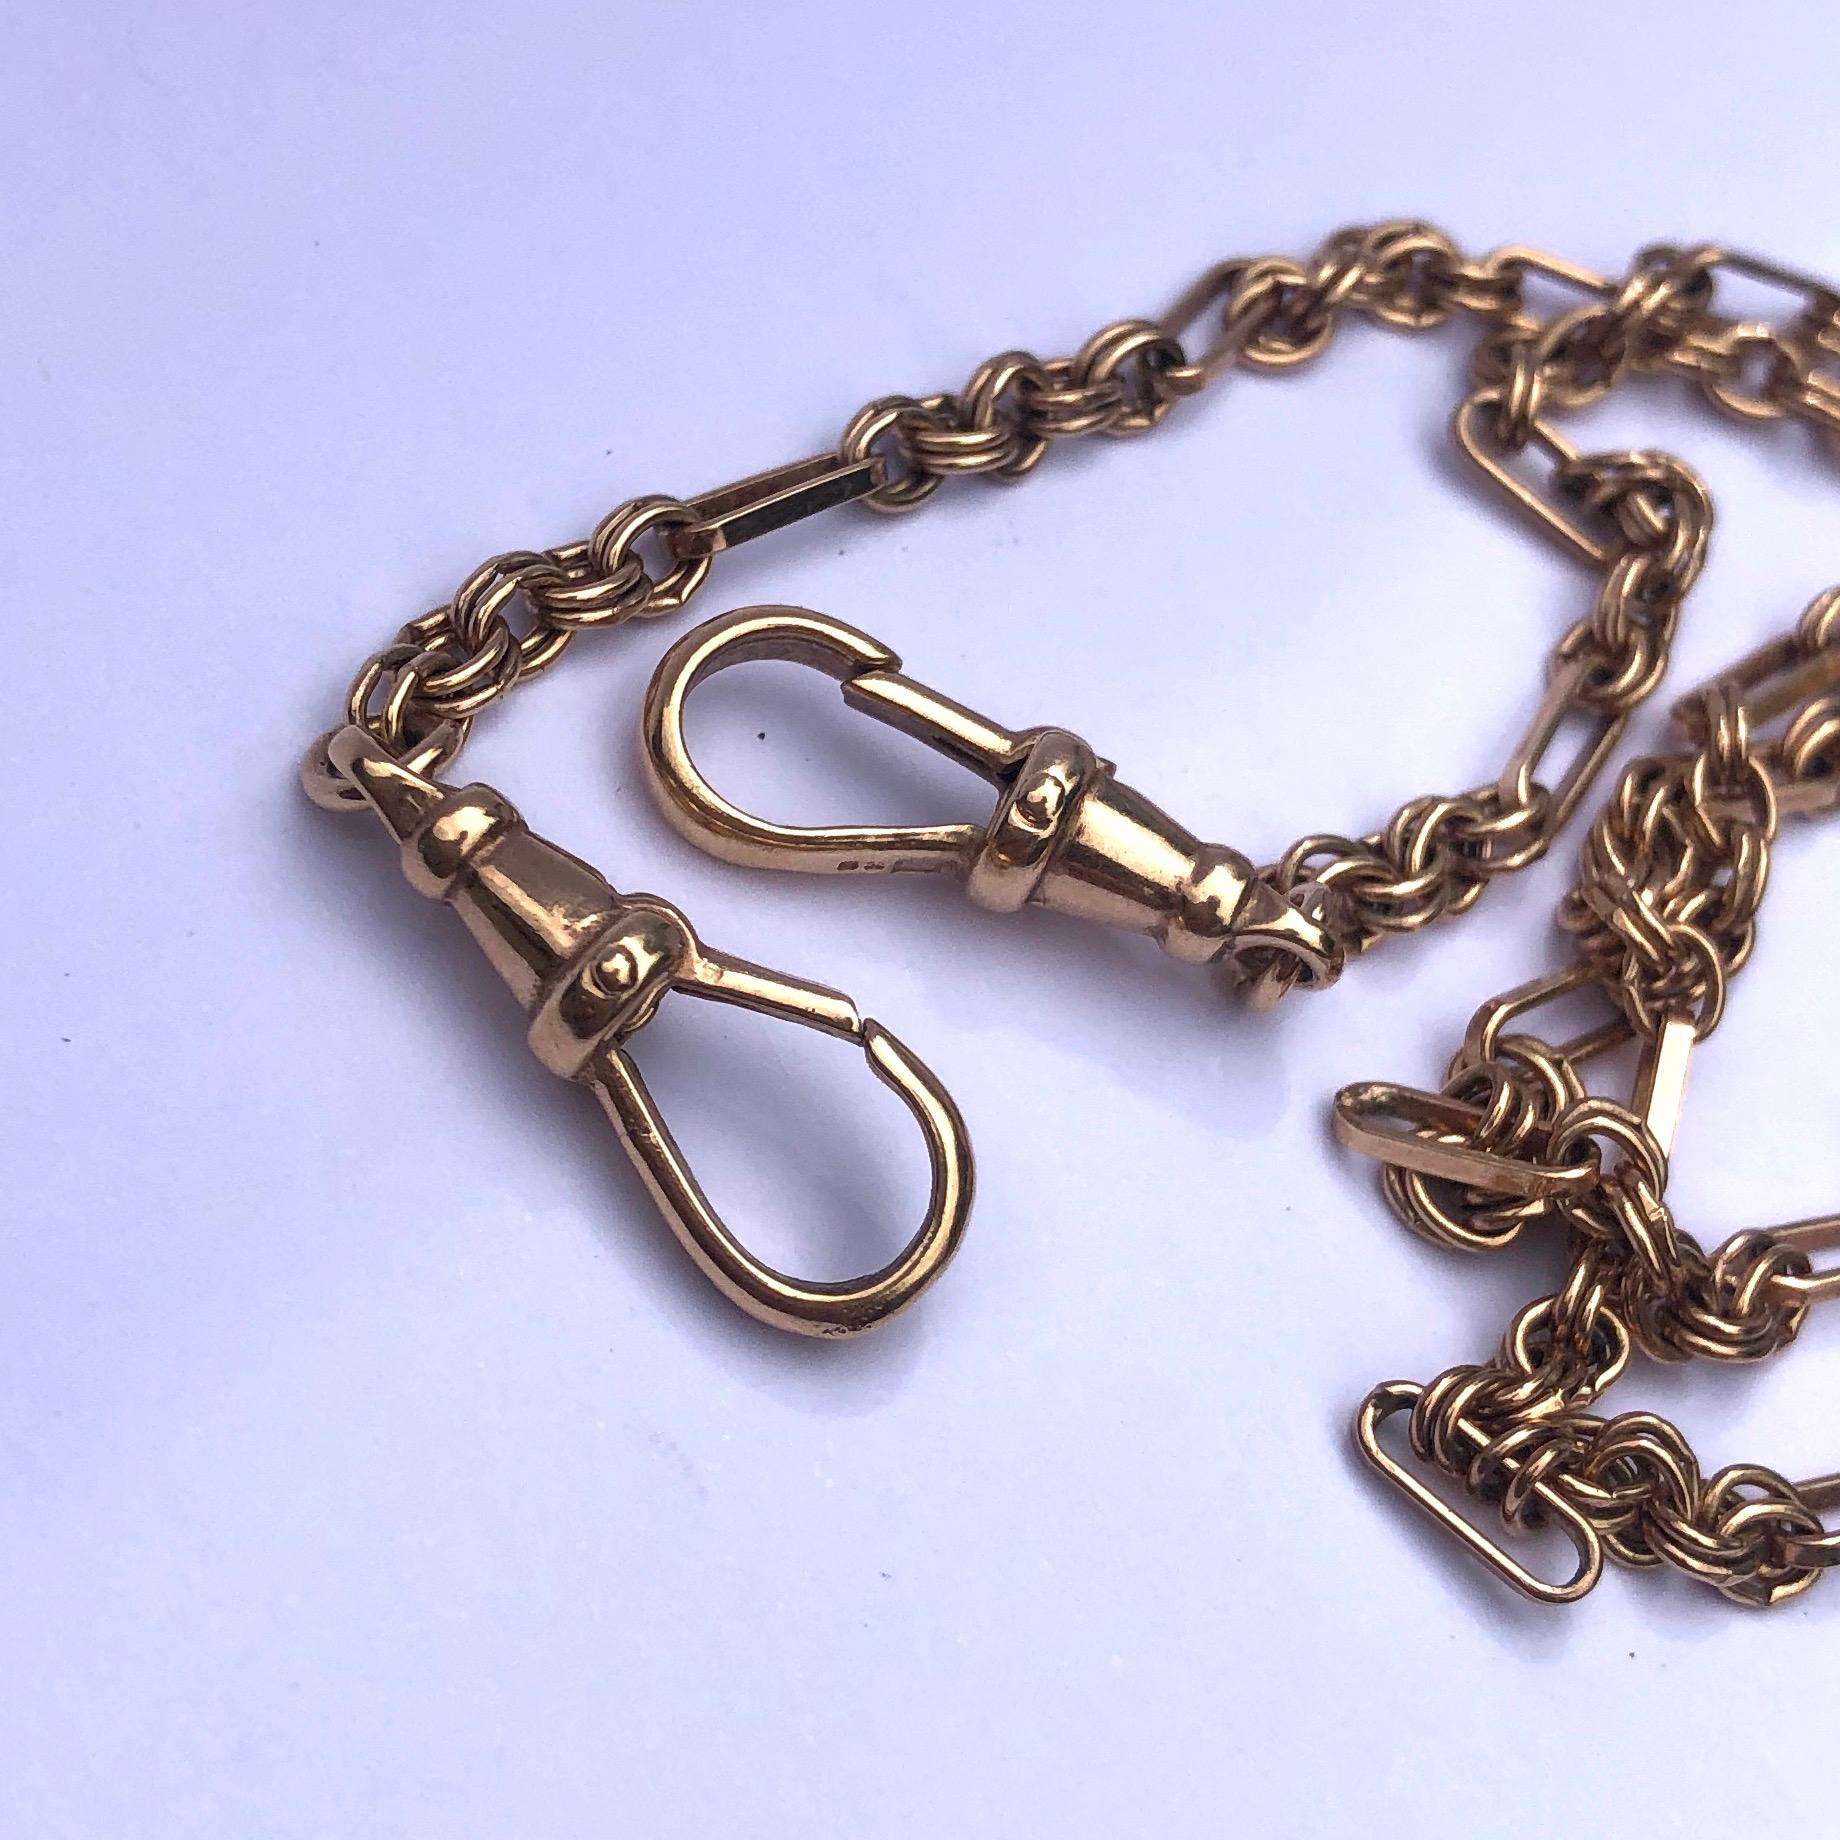 Victorian Edwardian 9 Carat Gold Albert or Necklace Chain with T-Bar